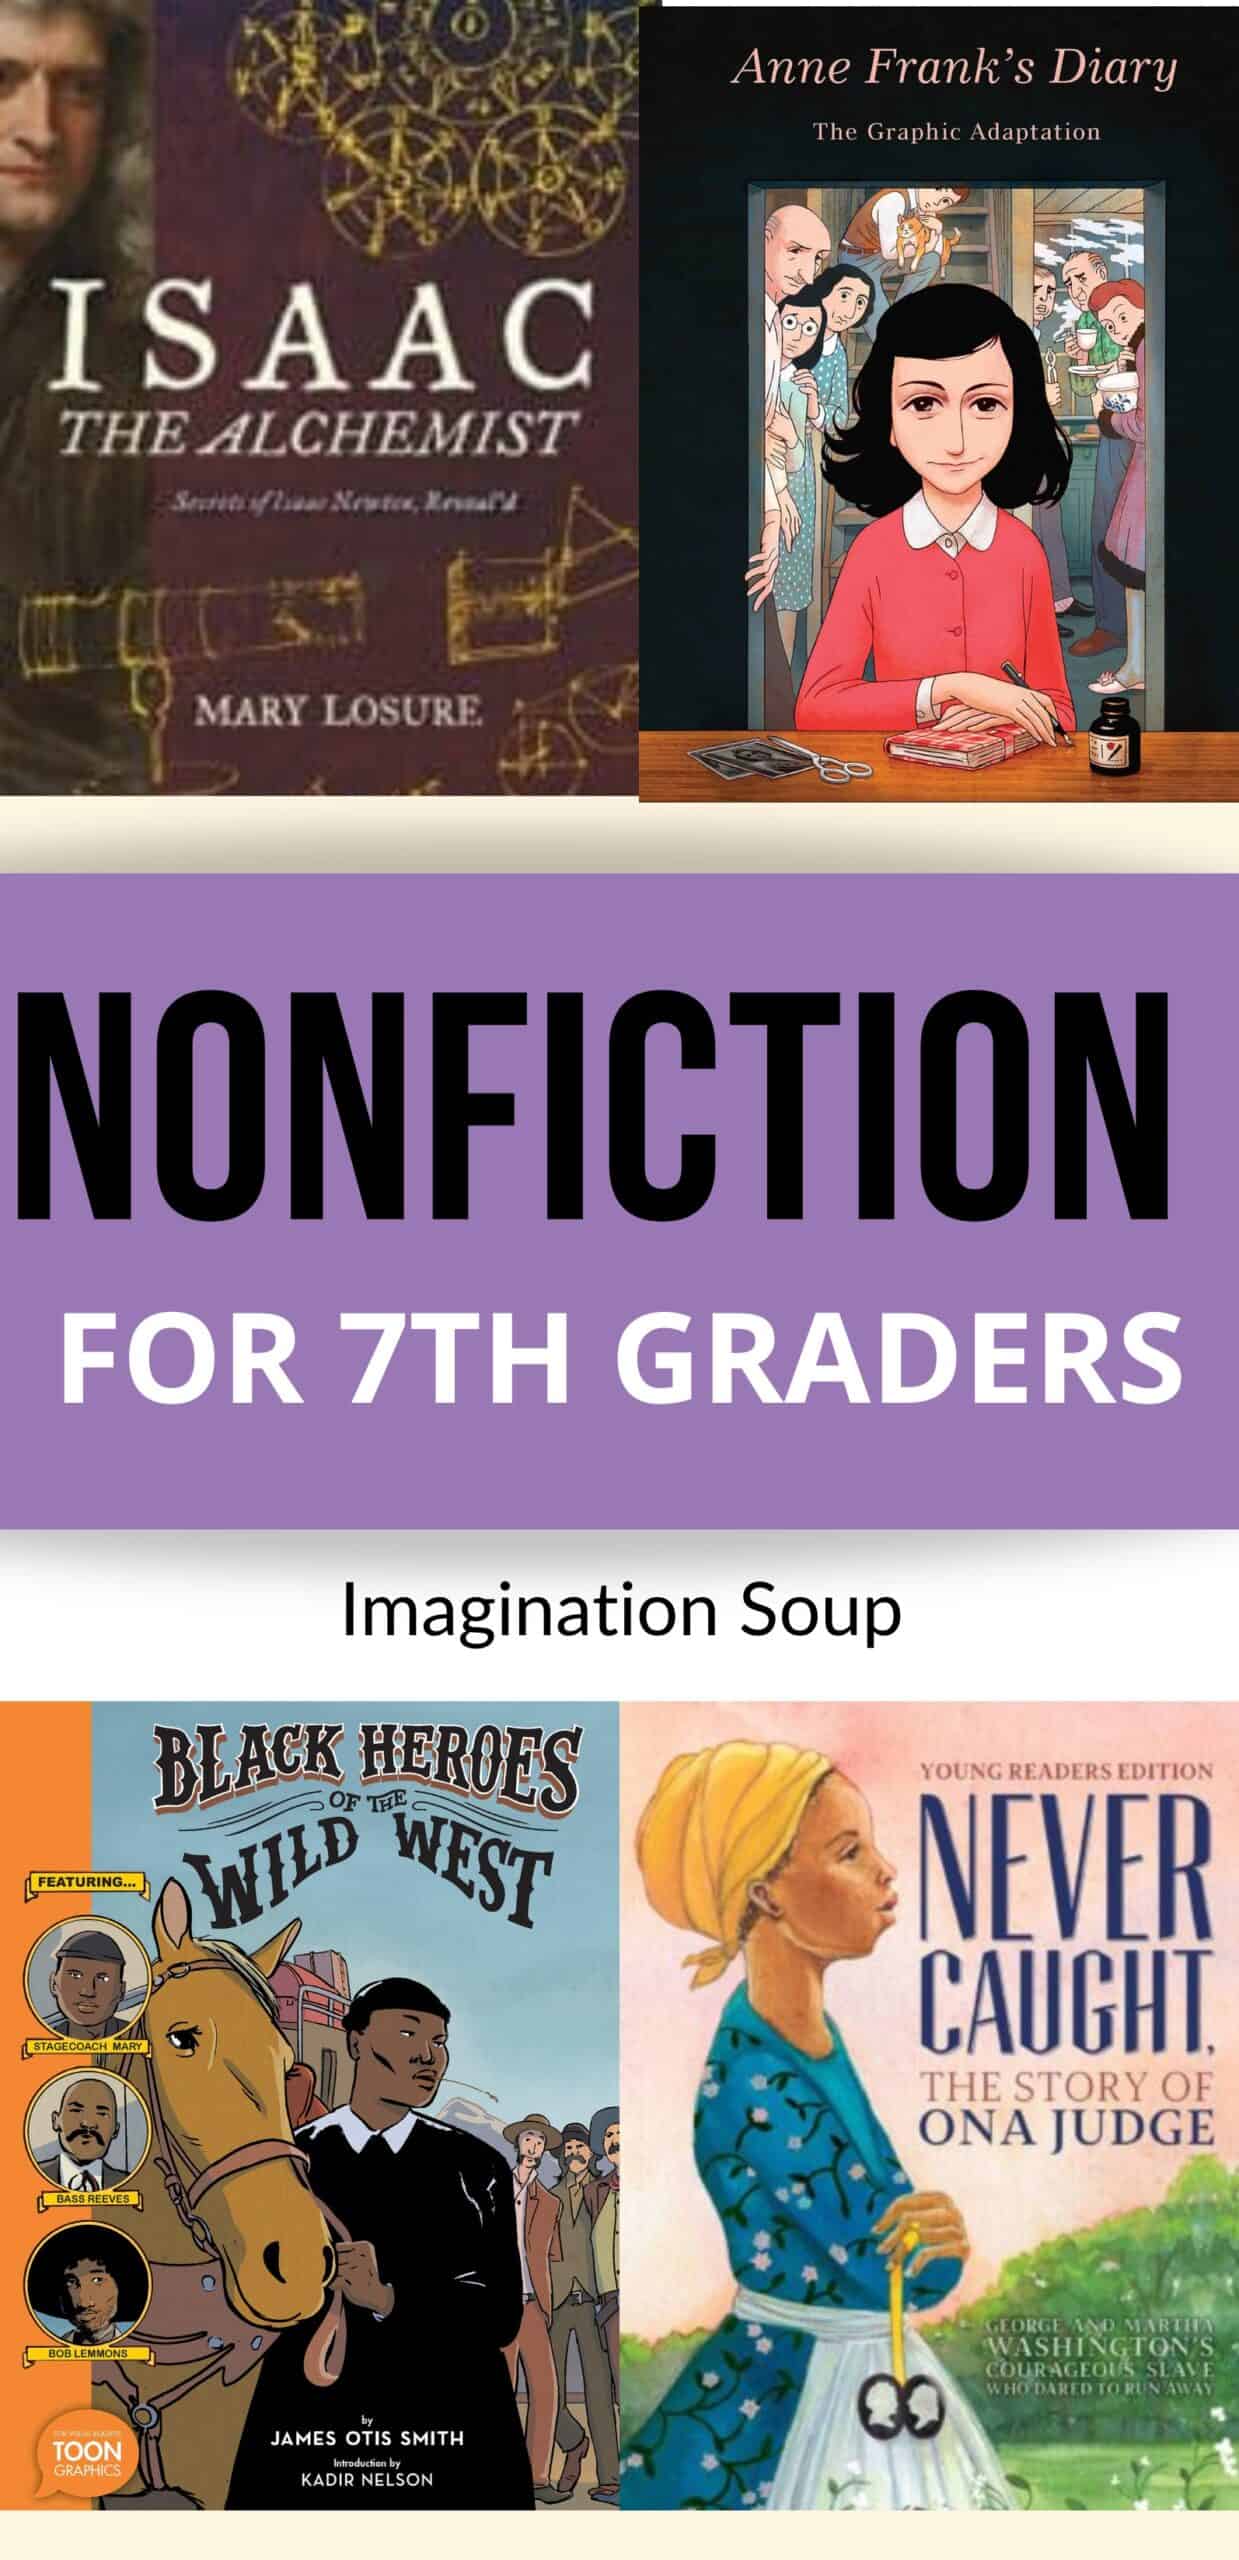 nonfiction books for 7th graders 12 year olds